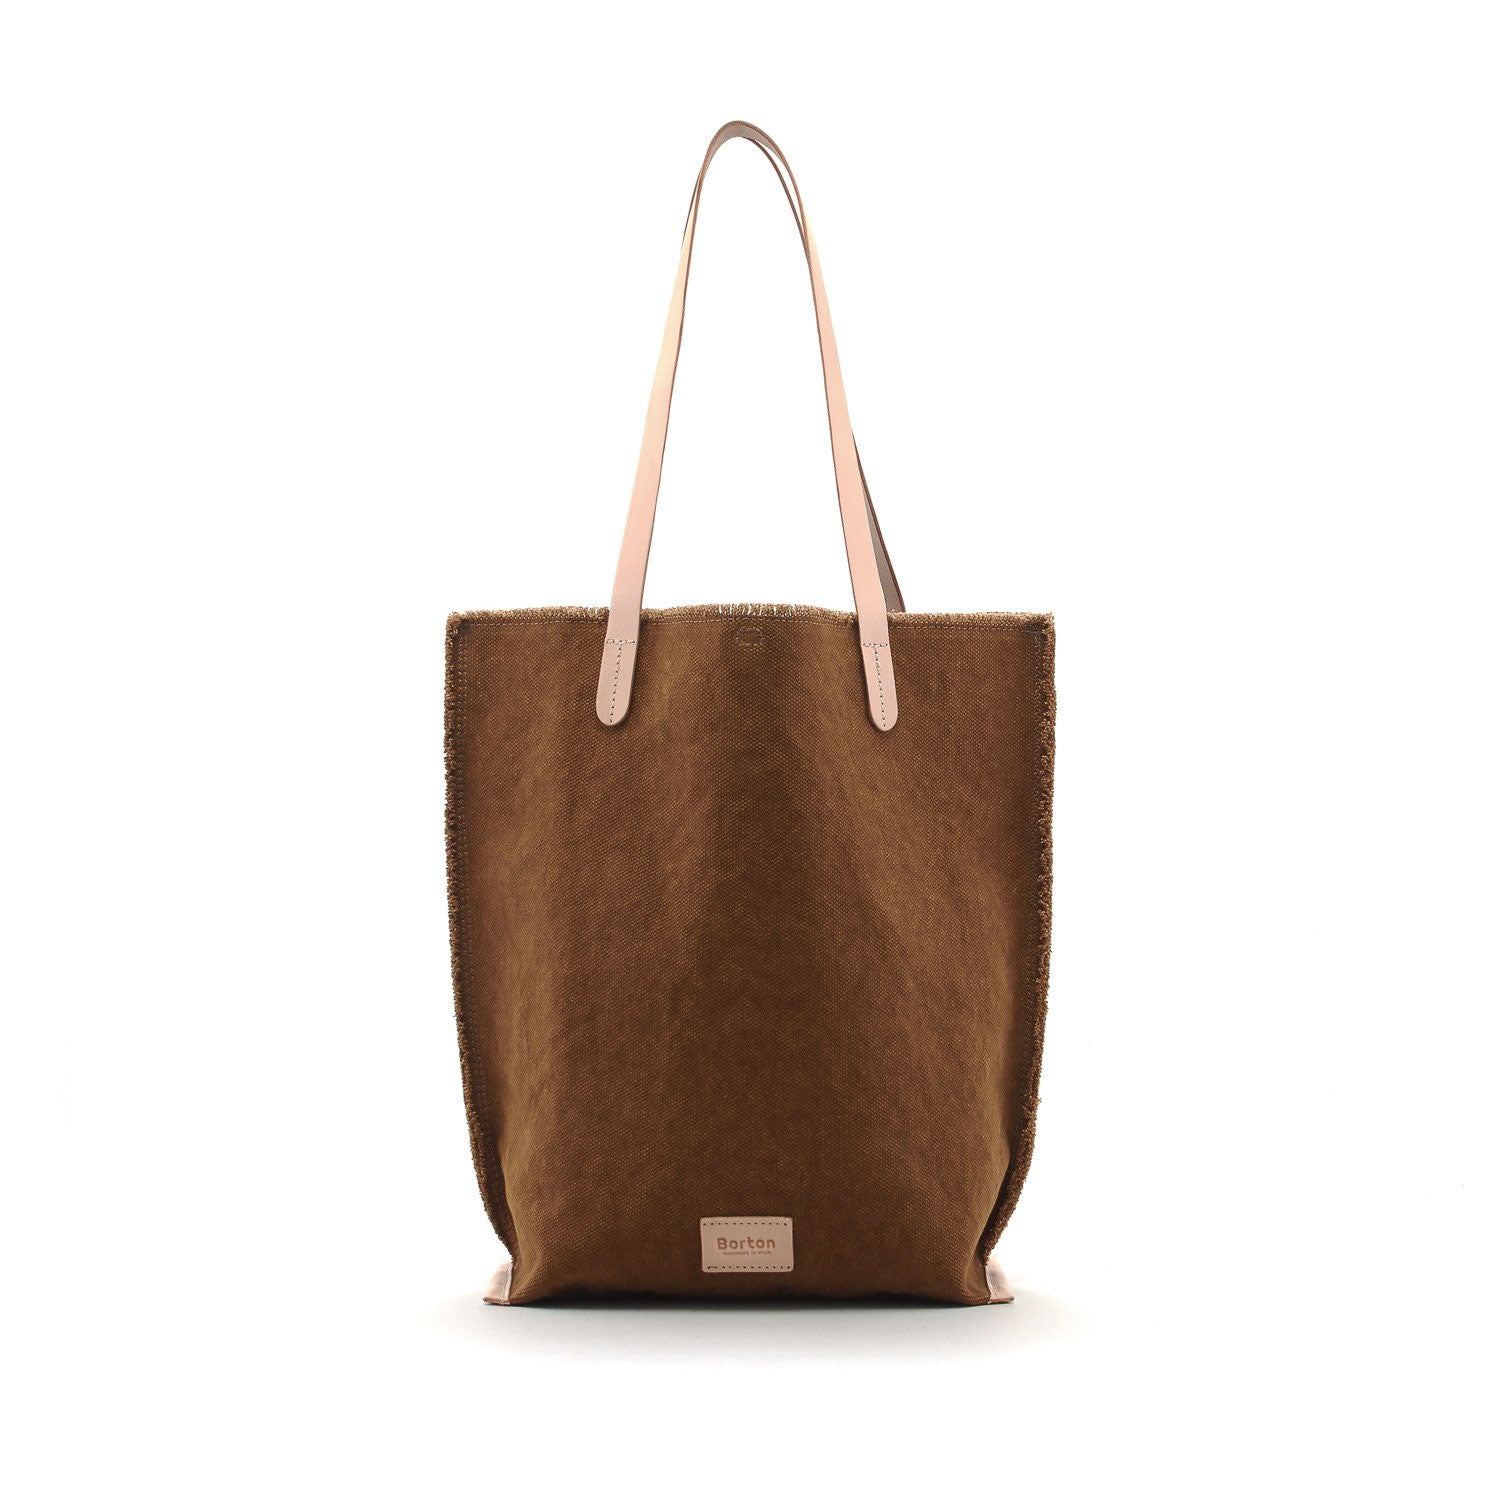 Mery Tote Bag Tan Canvas & Nat Leather